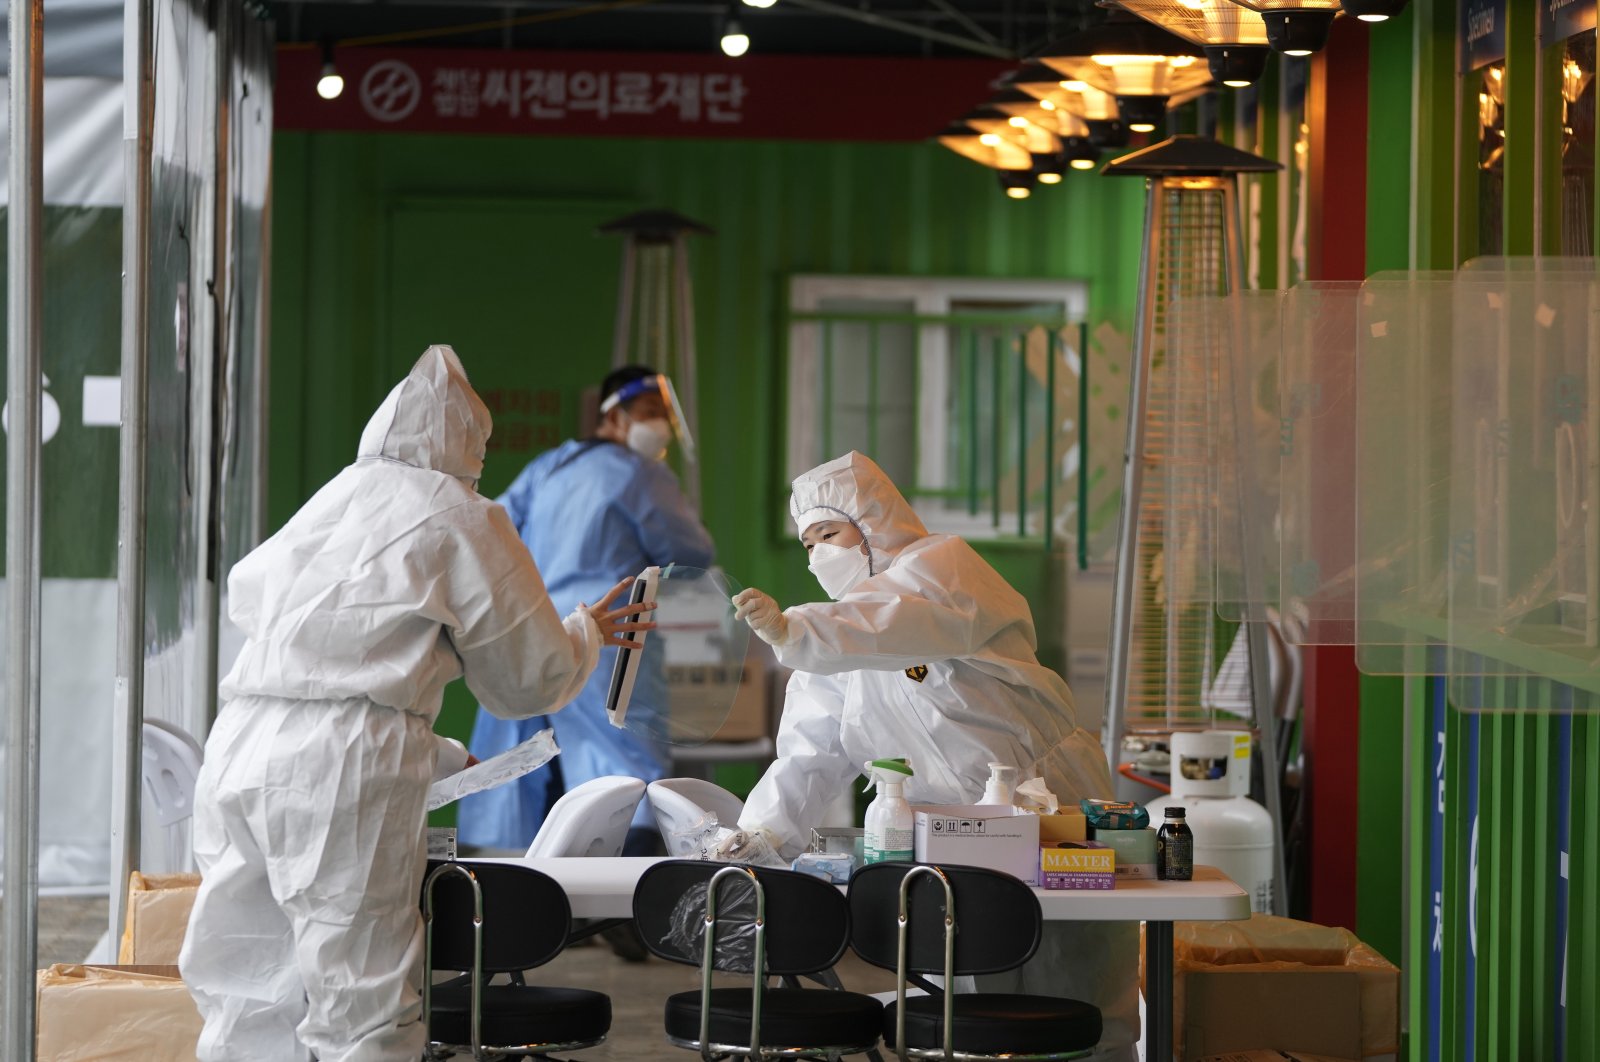 Medical workers wearing protective gear prepare to take samples at a temporary screening clinic for the coronavirus in Seoul, South Korea, Dec. 29, 2021. (AP Photo)